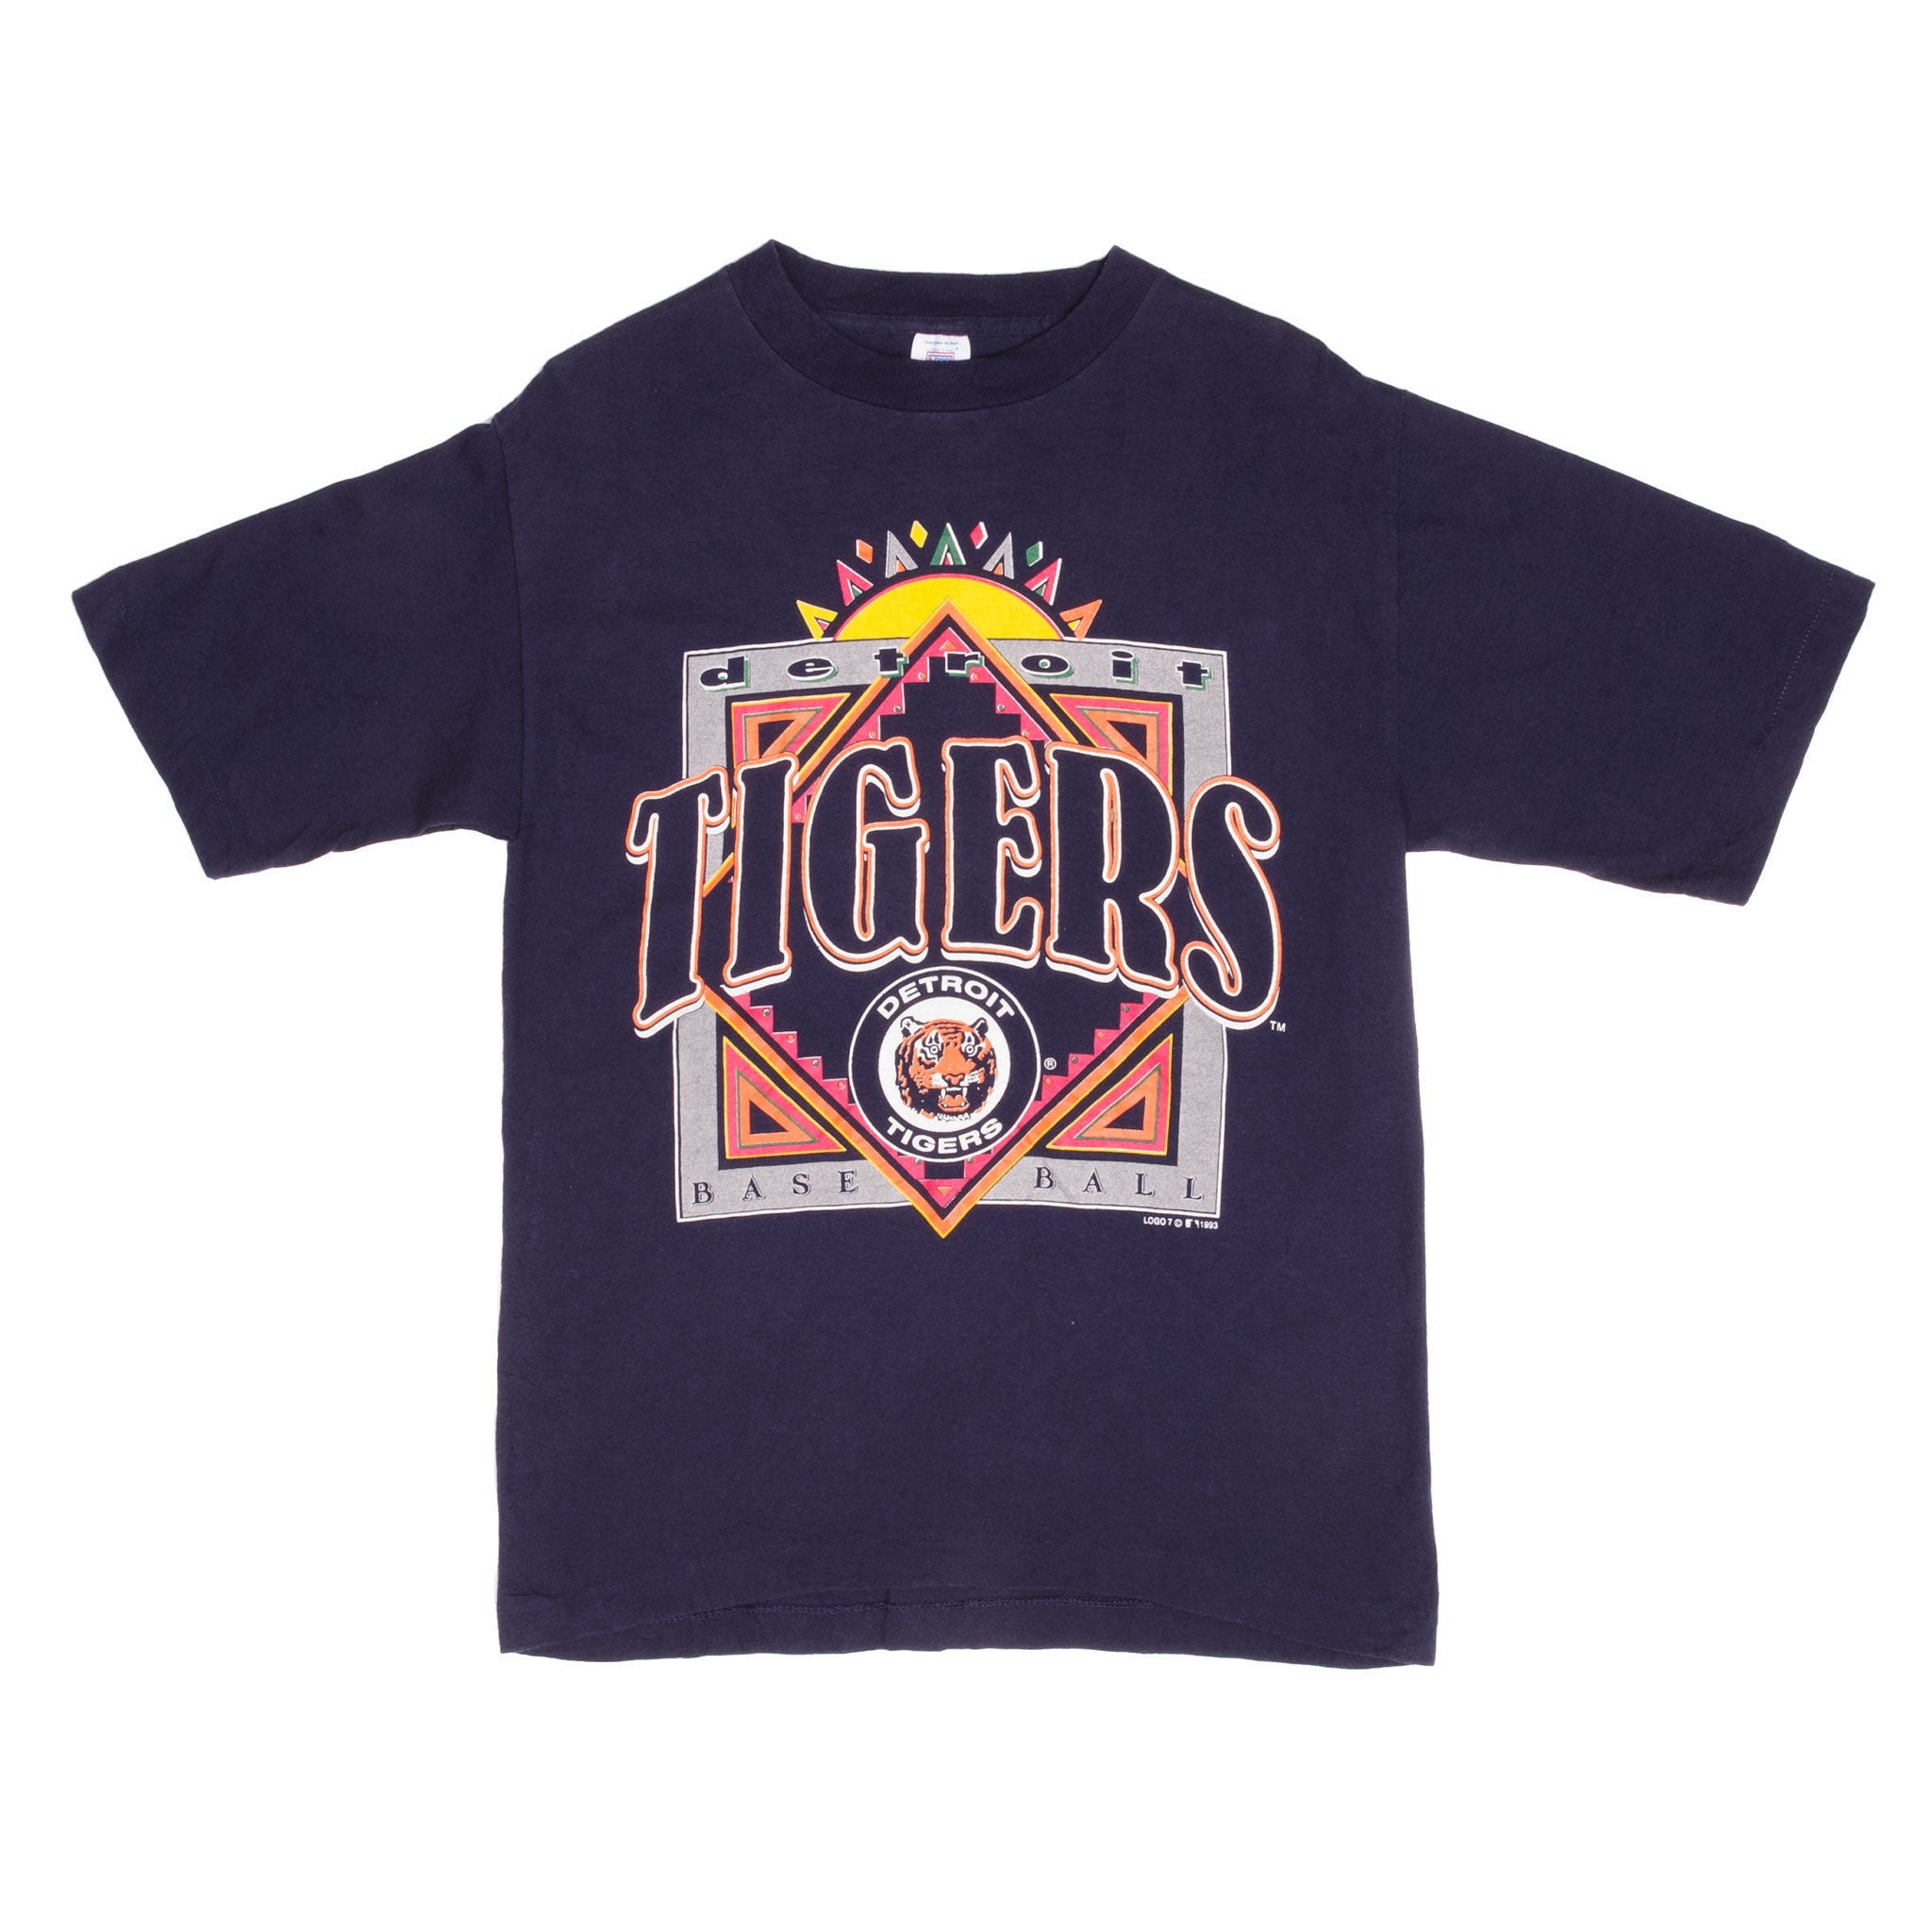 Cheap Detroit Tigers Apparel, Discount Tigers Gear, MLB Tigers Merchandise  On Sale